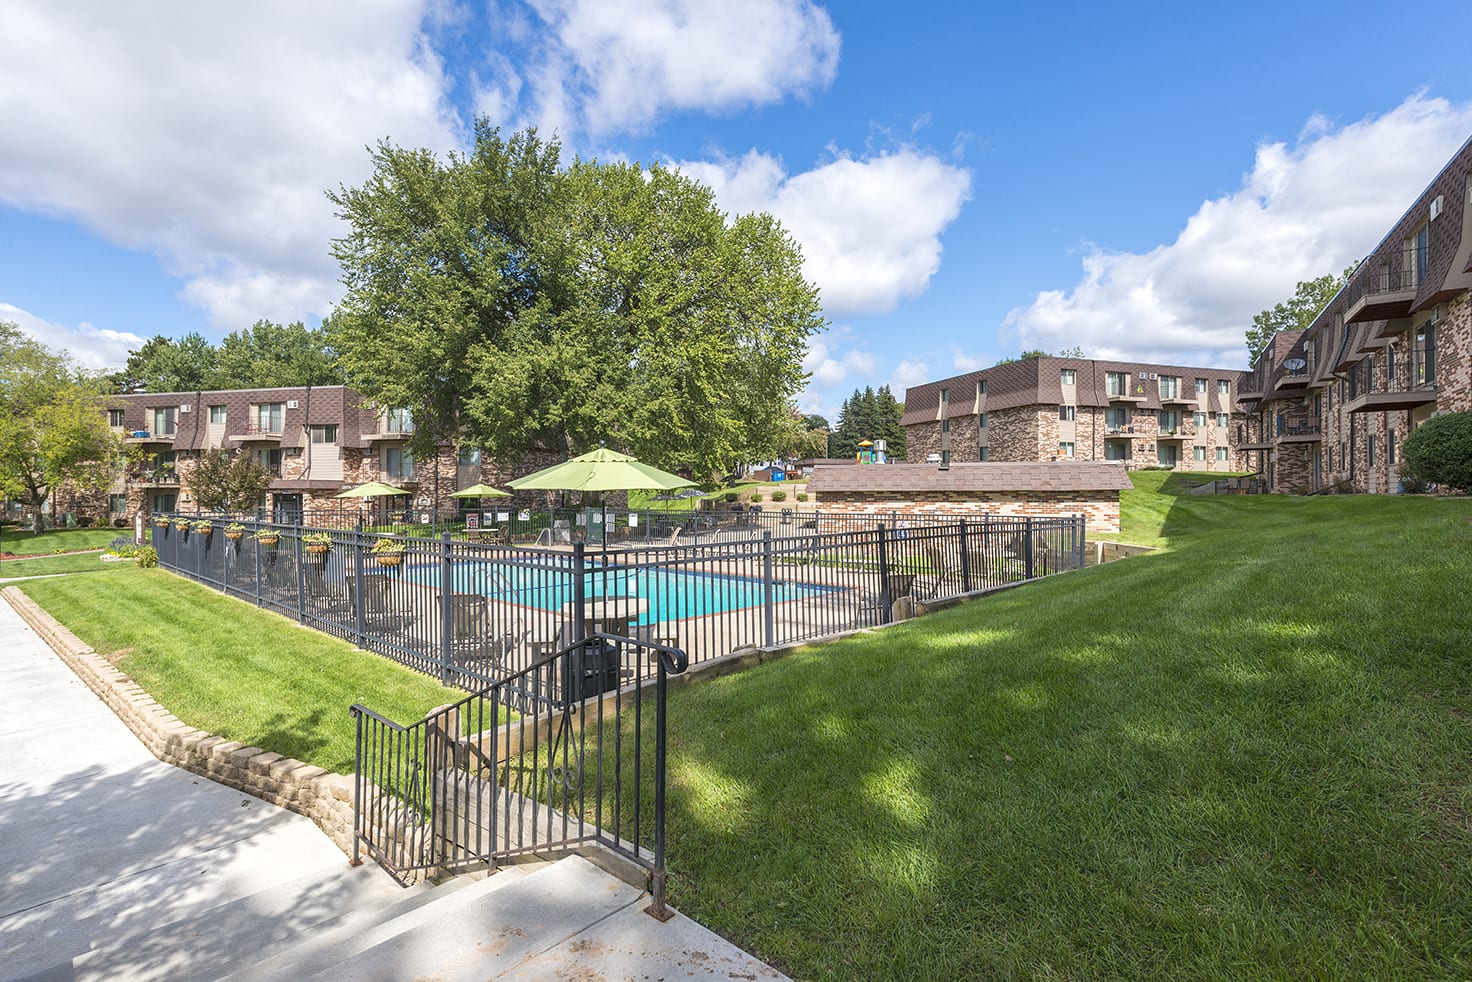 Silver Ridge  Apartments in Maplewood, MN